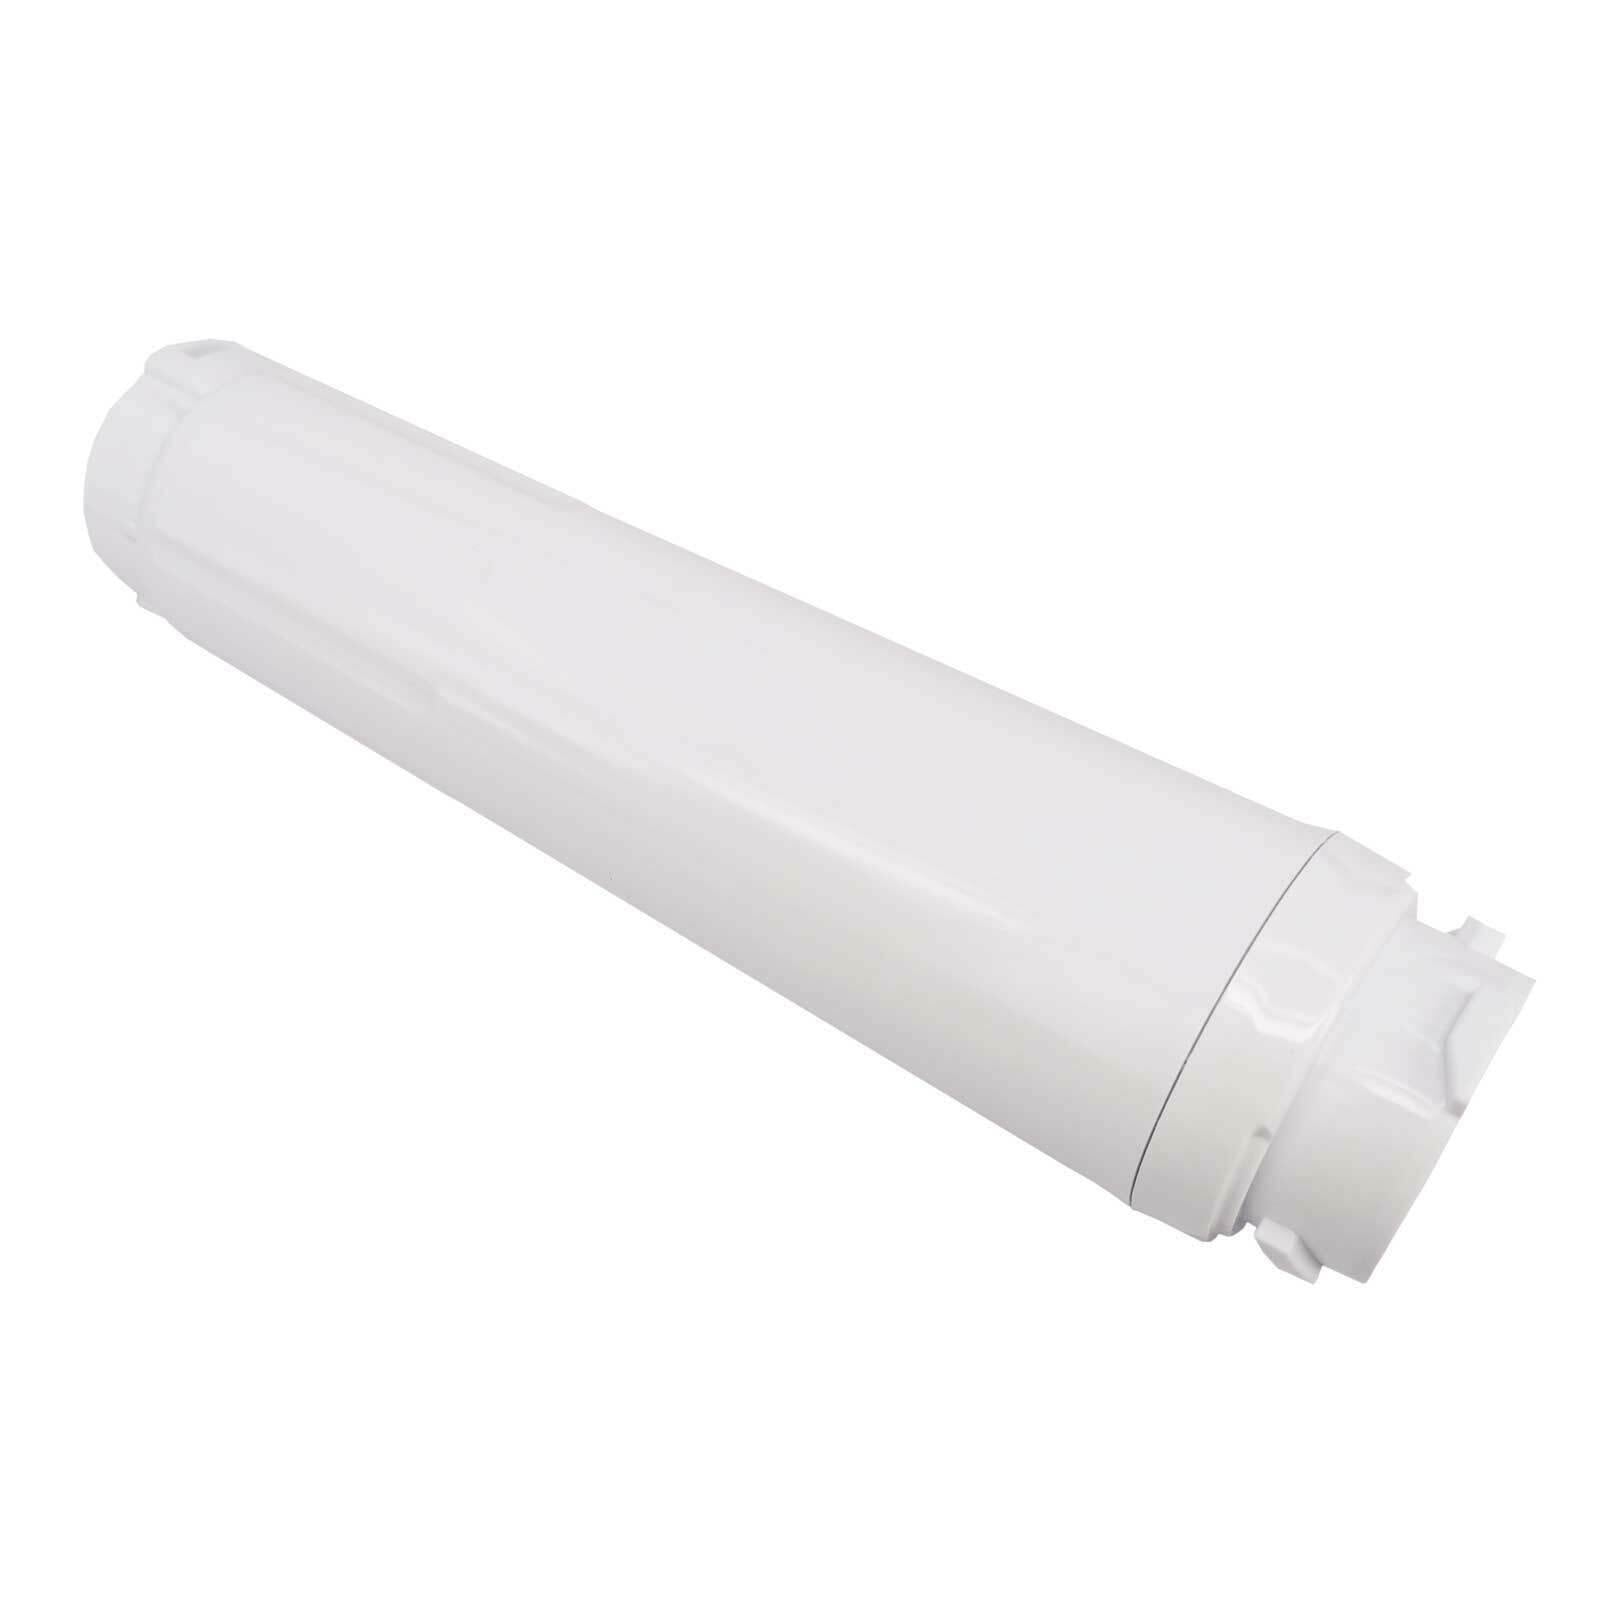 Water Fridge Filter Compatible For Bosch 644845 Ultra Clarity Haier 0060820860 Sparesbarn